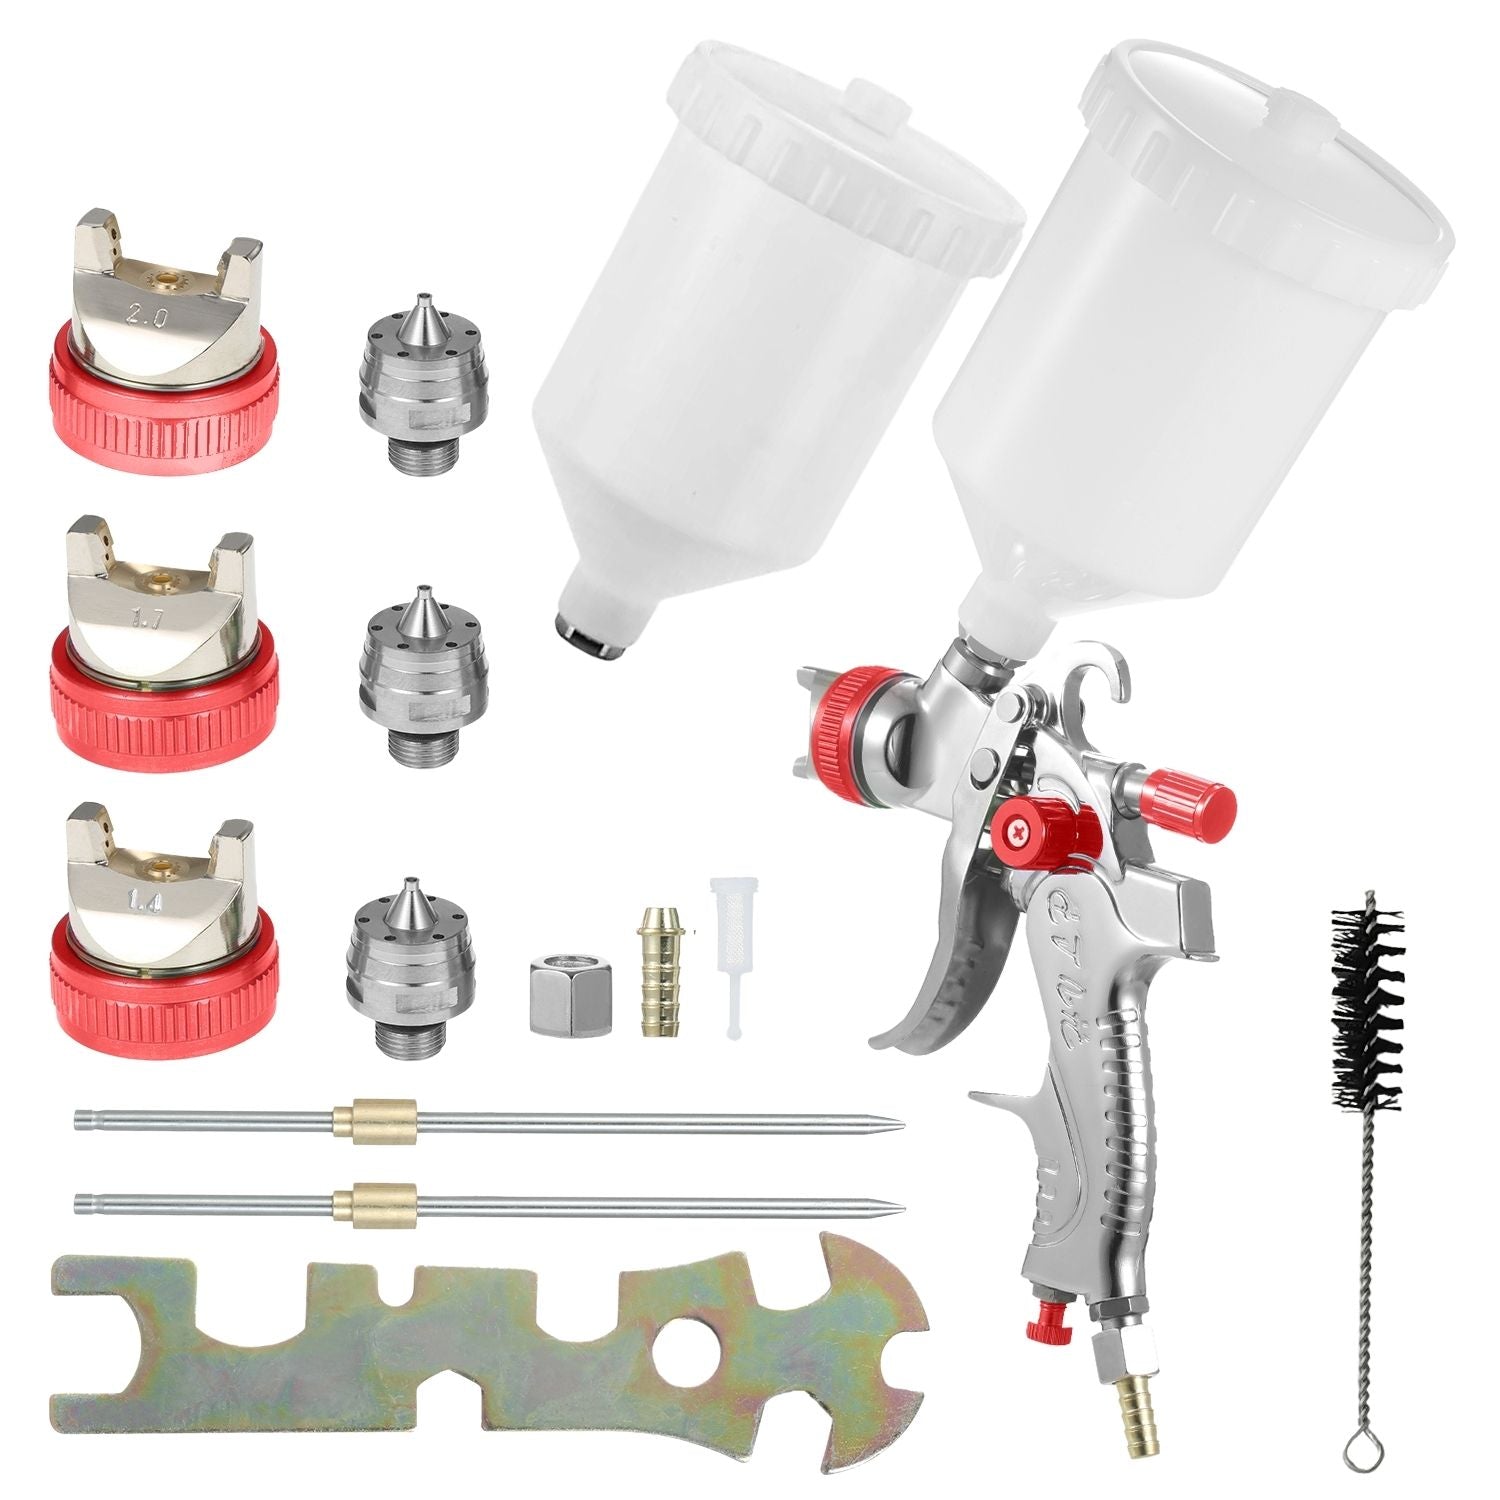 Gravity Feed Air Spray Paint Gun Kit with 3 Nozzle (Red) RNM-PSG-100-SK